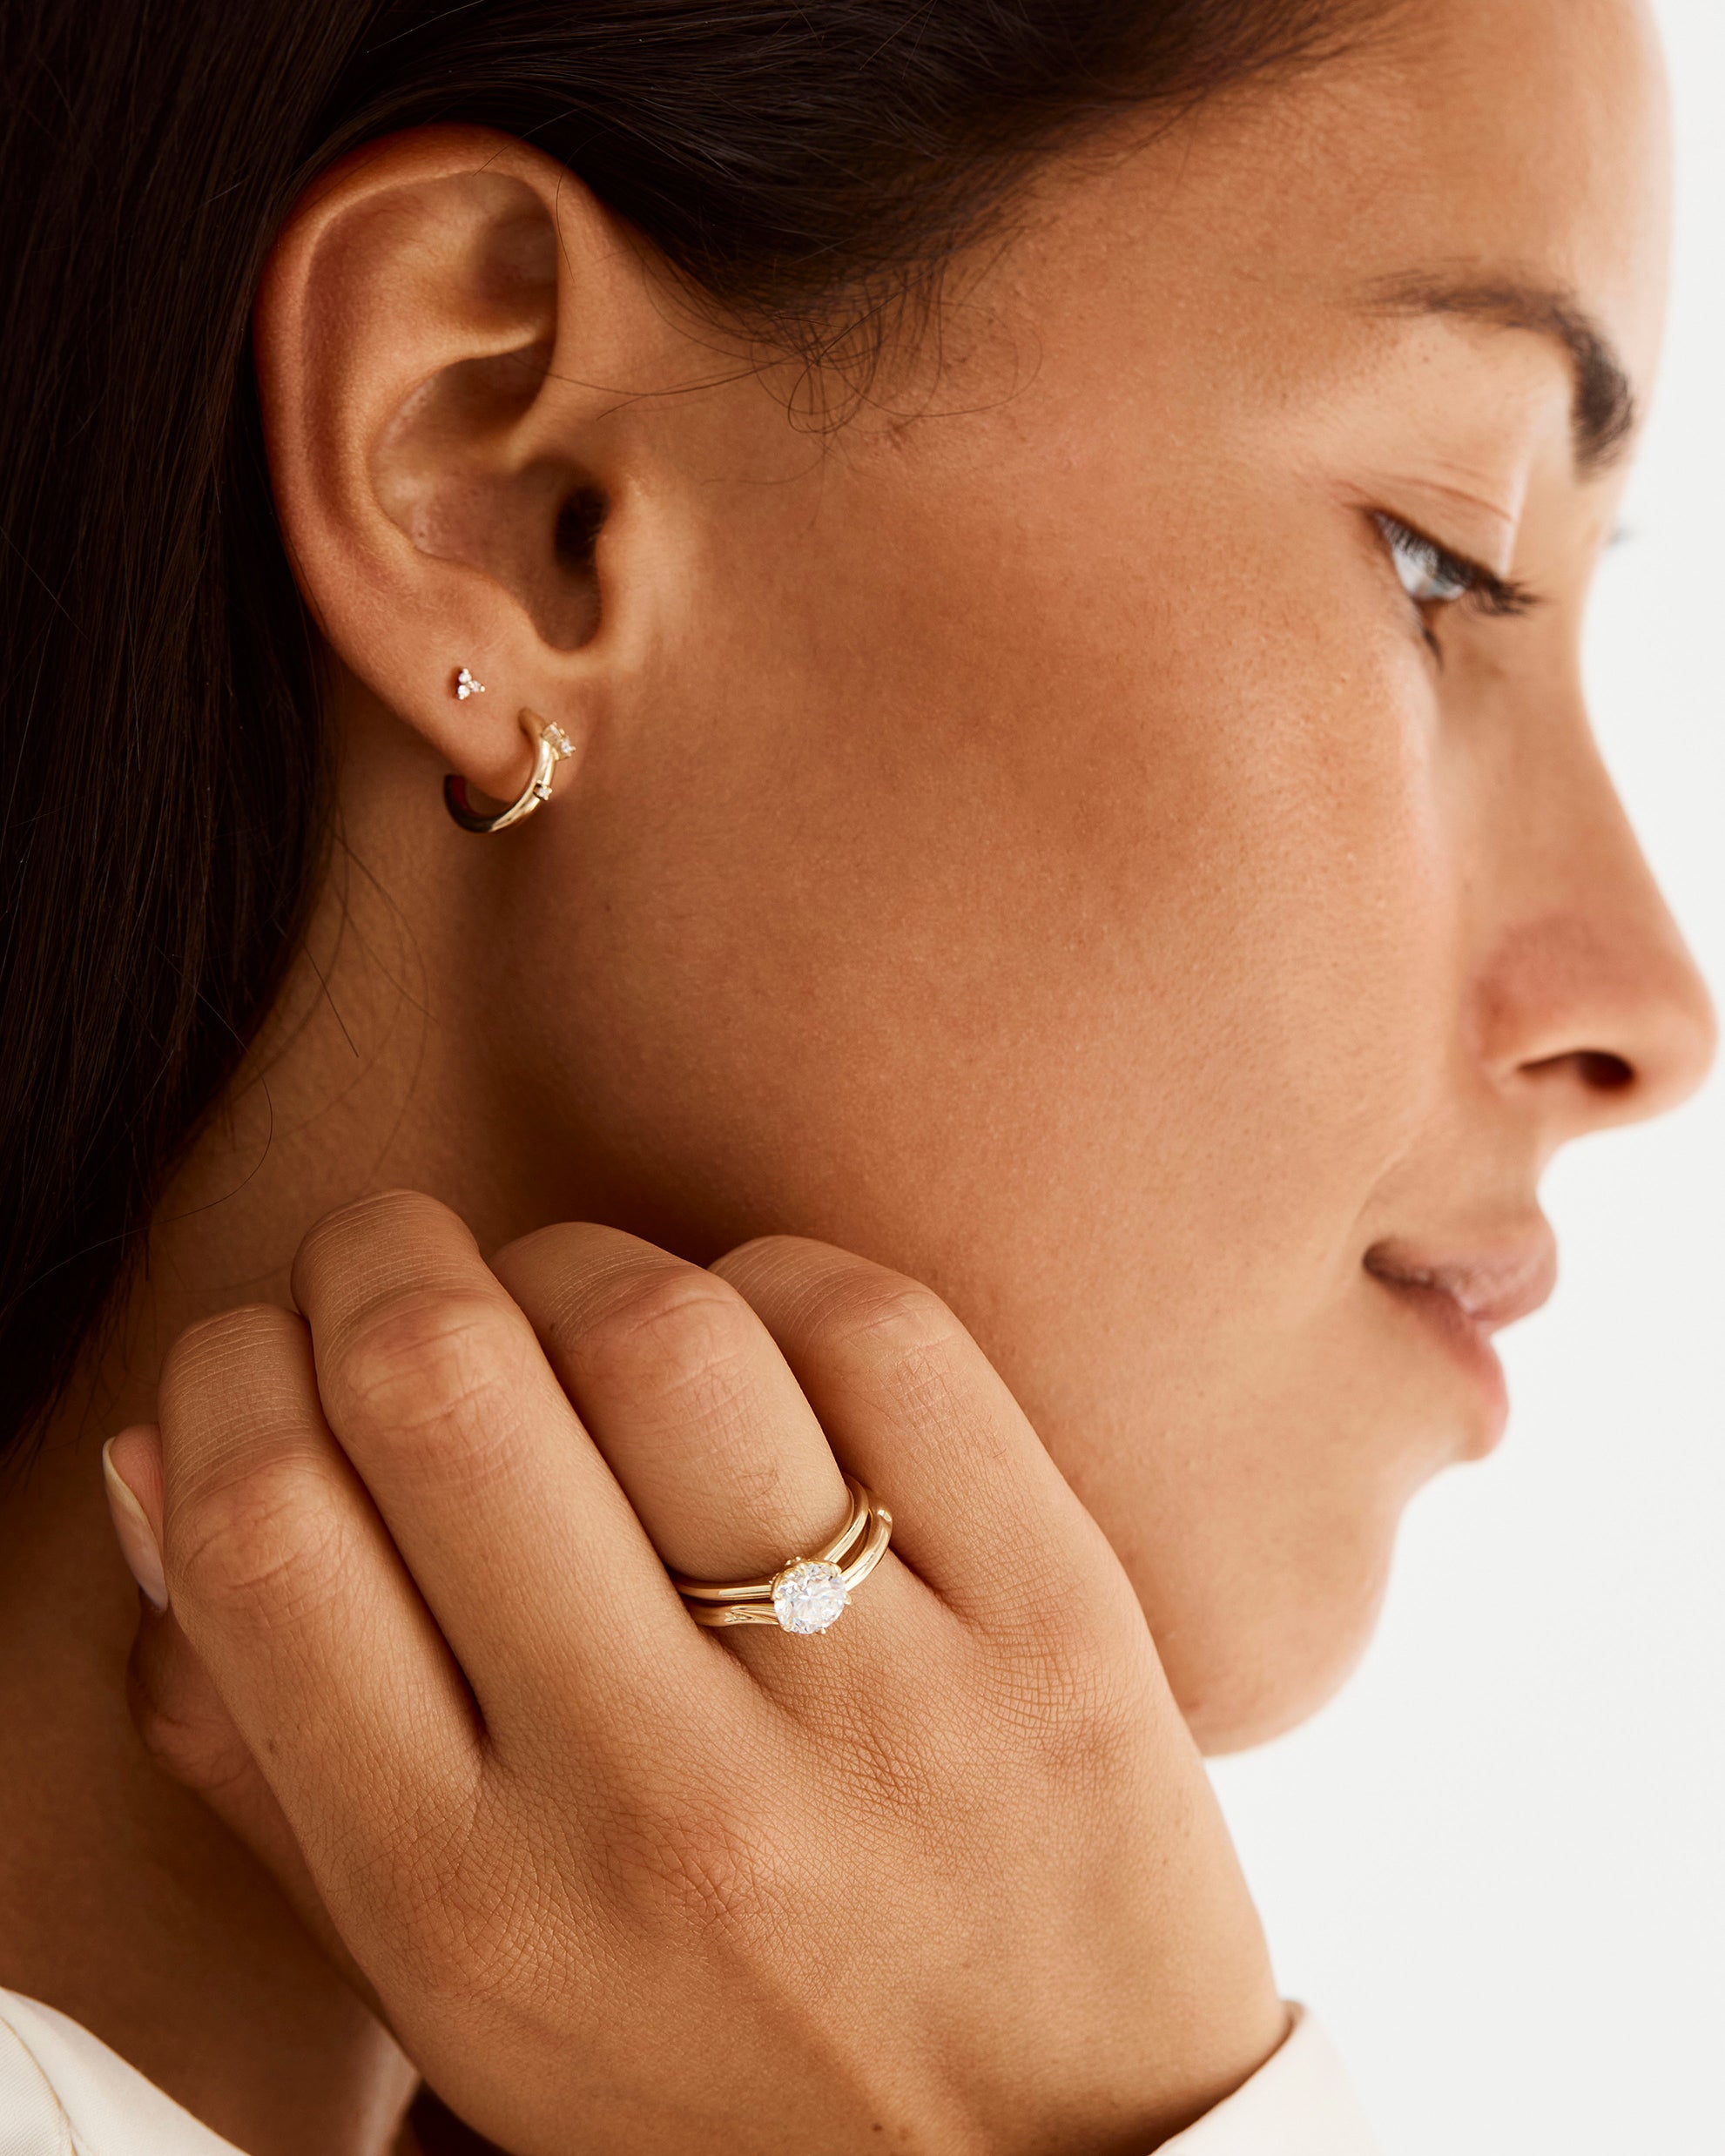 A model wears our Ines Hoops feature a petite cluster of diamonds